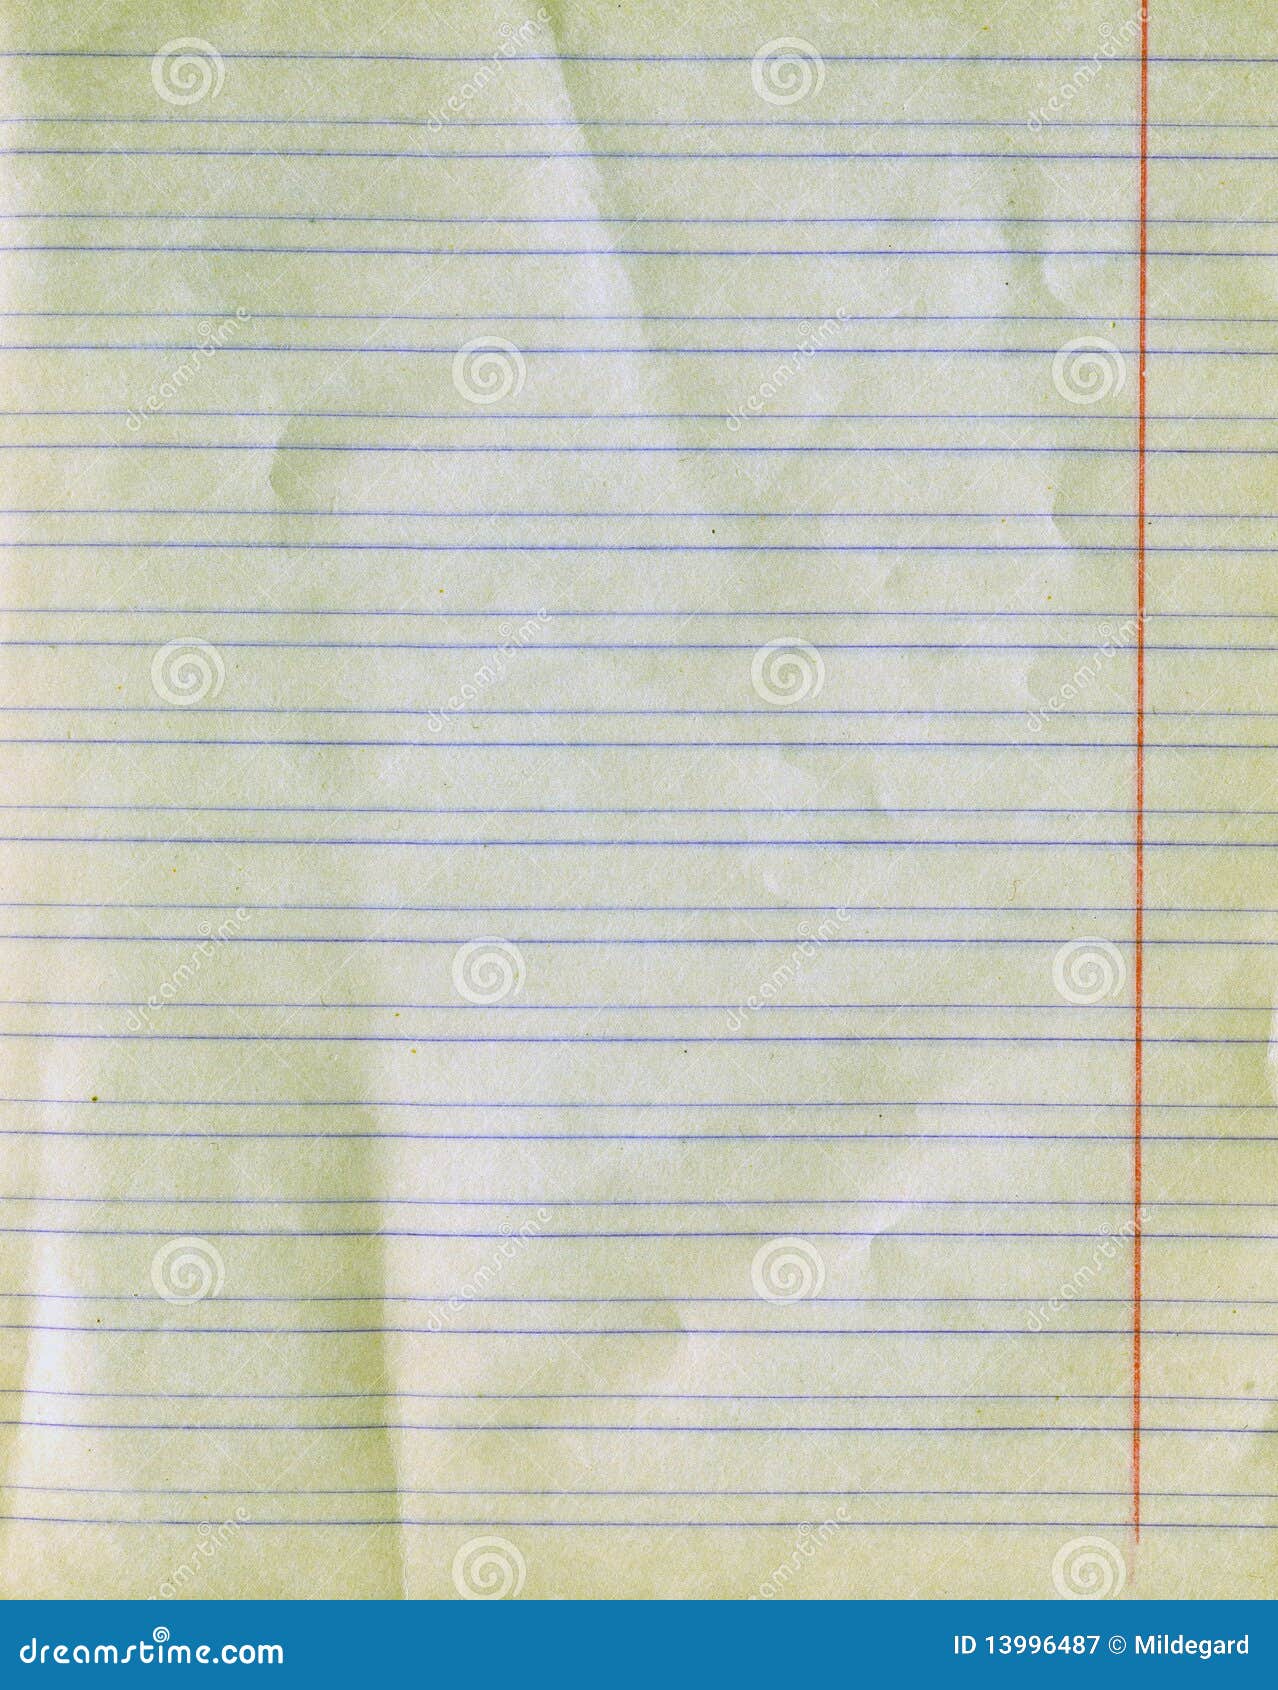 old ruled paper texture